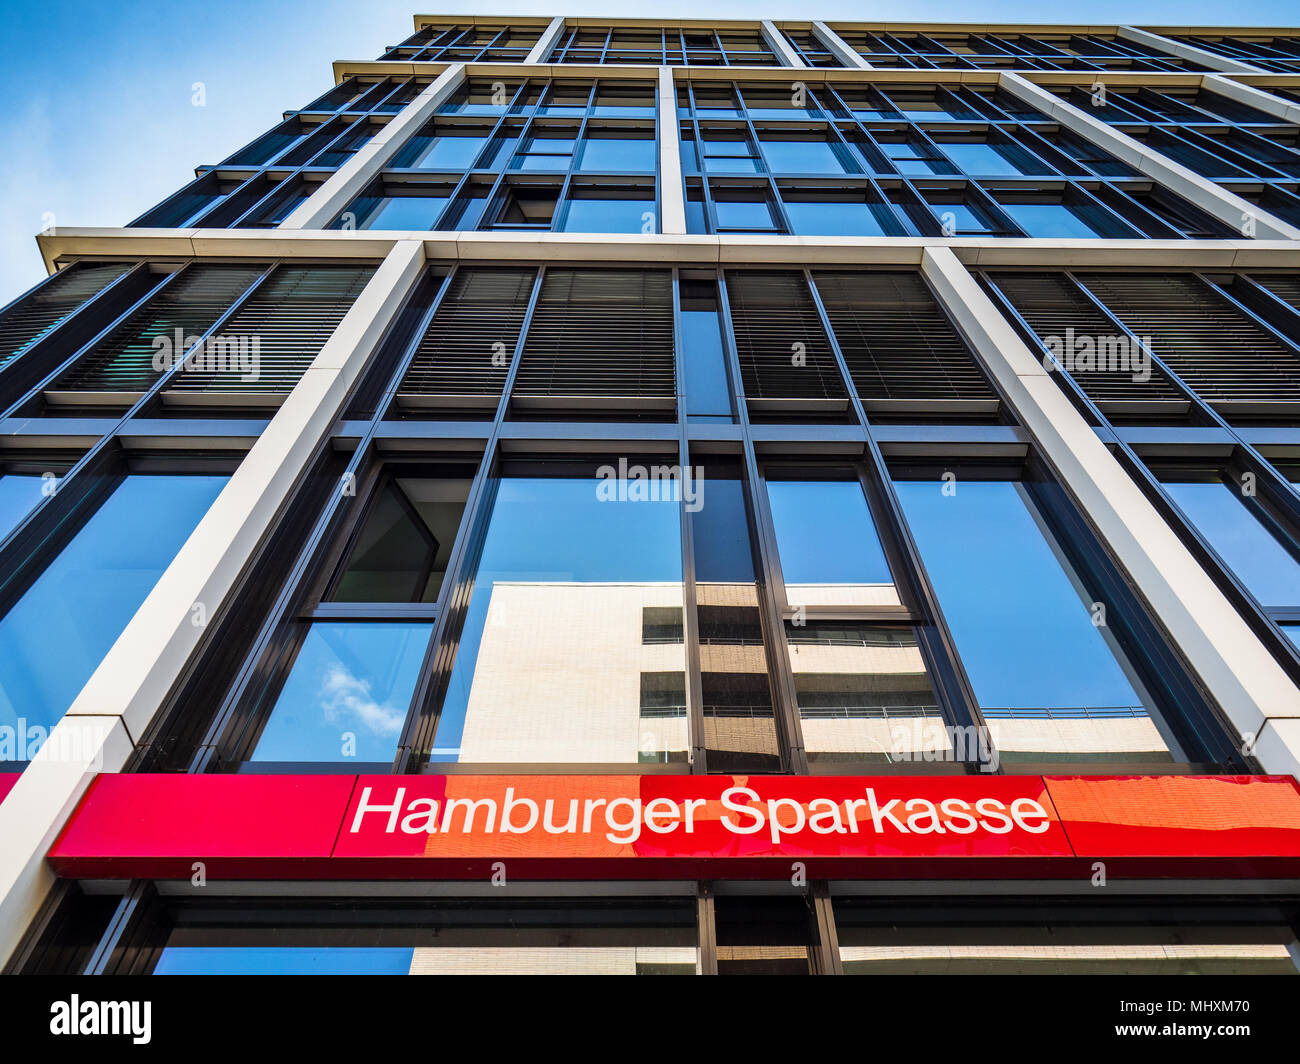 Hamburger Sparkasse HASPA, one of five free public savings banks in Germany, founded in 1827 Stock Photo